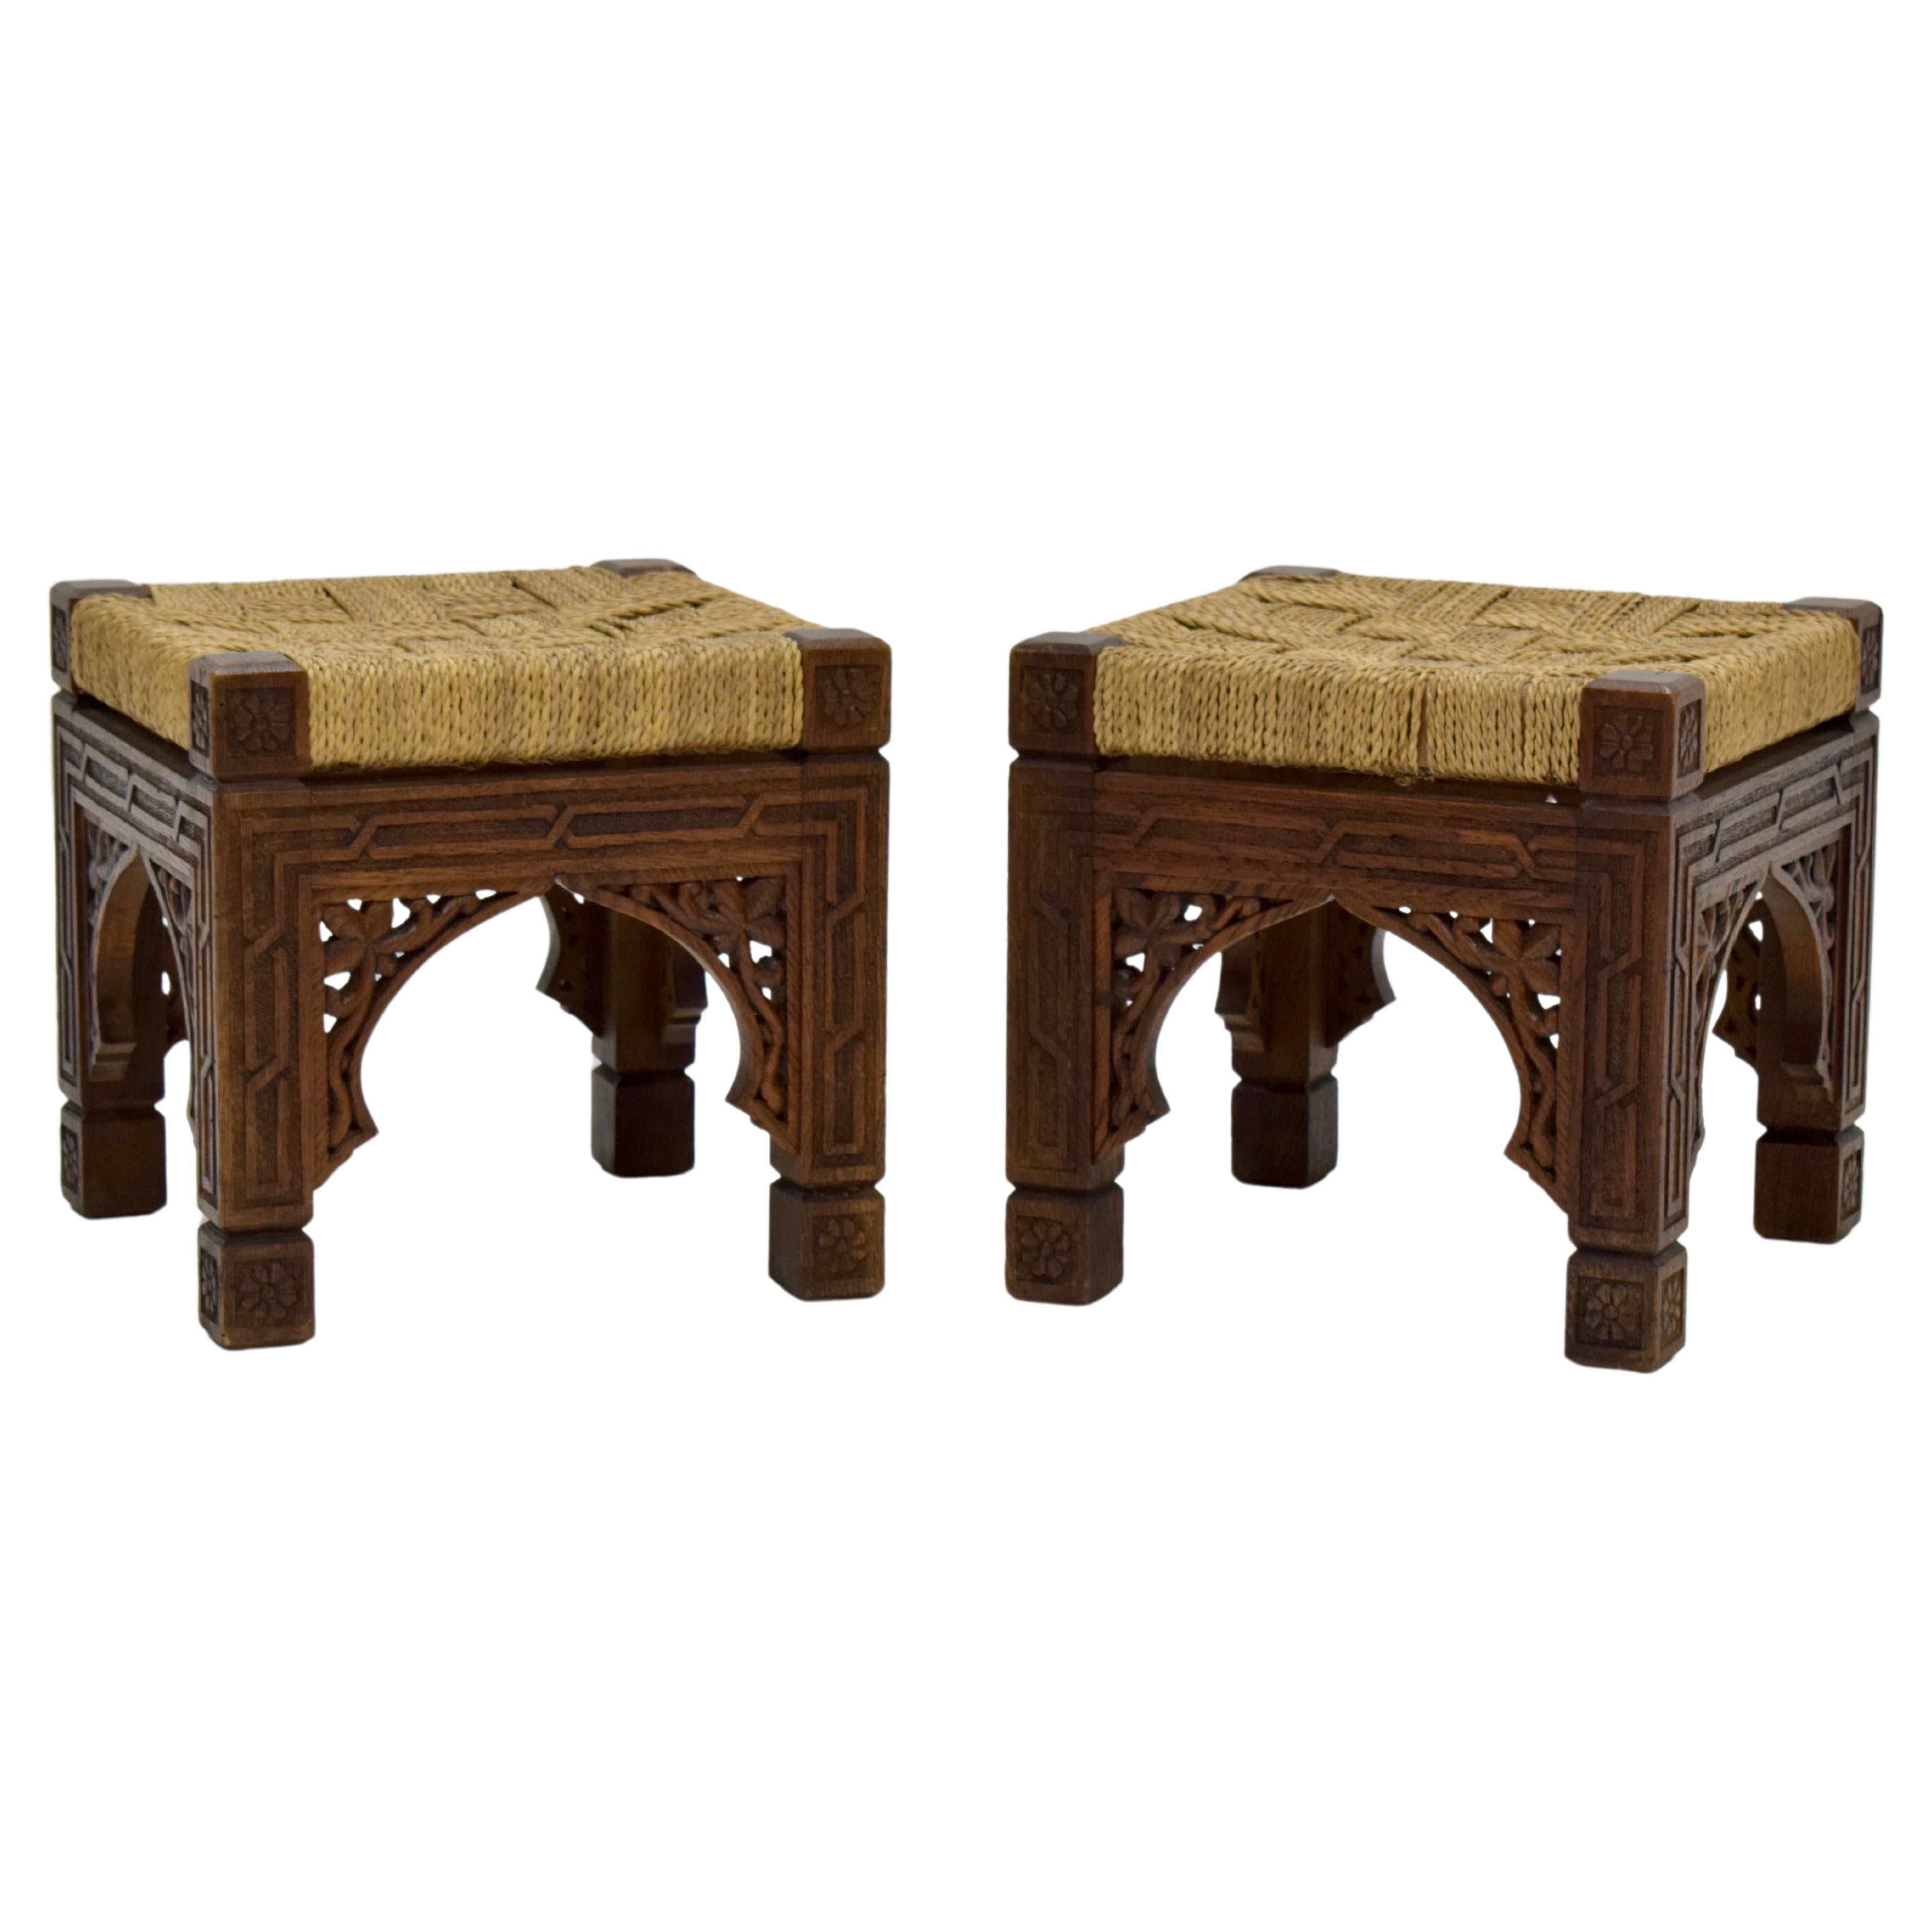 Pair of Carved Wood and Danish Cord Stools